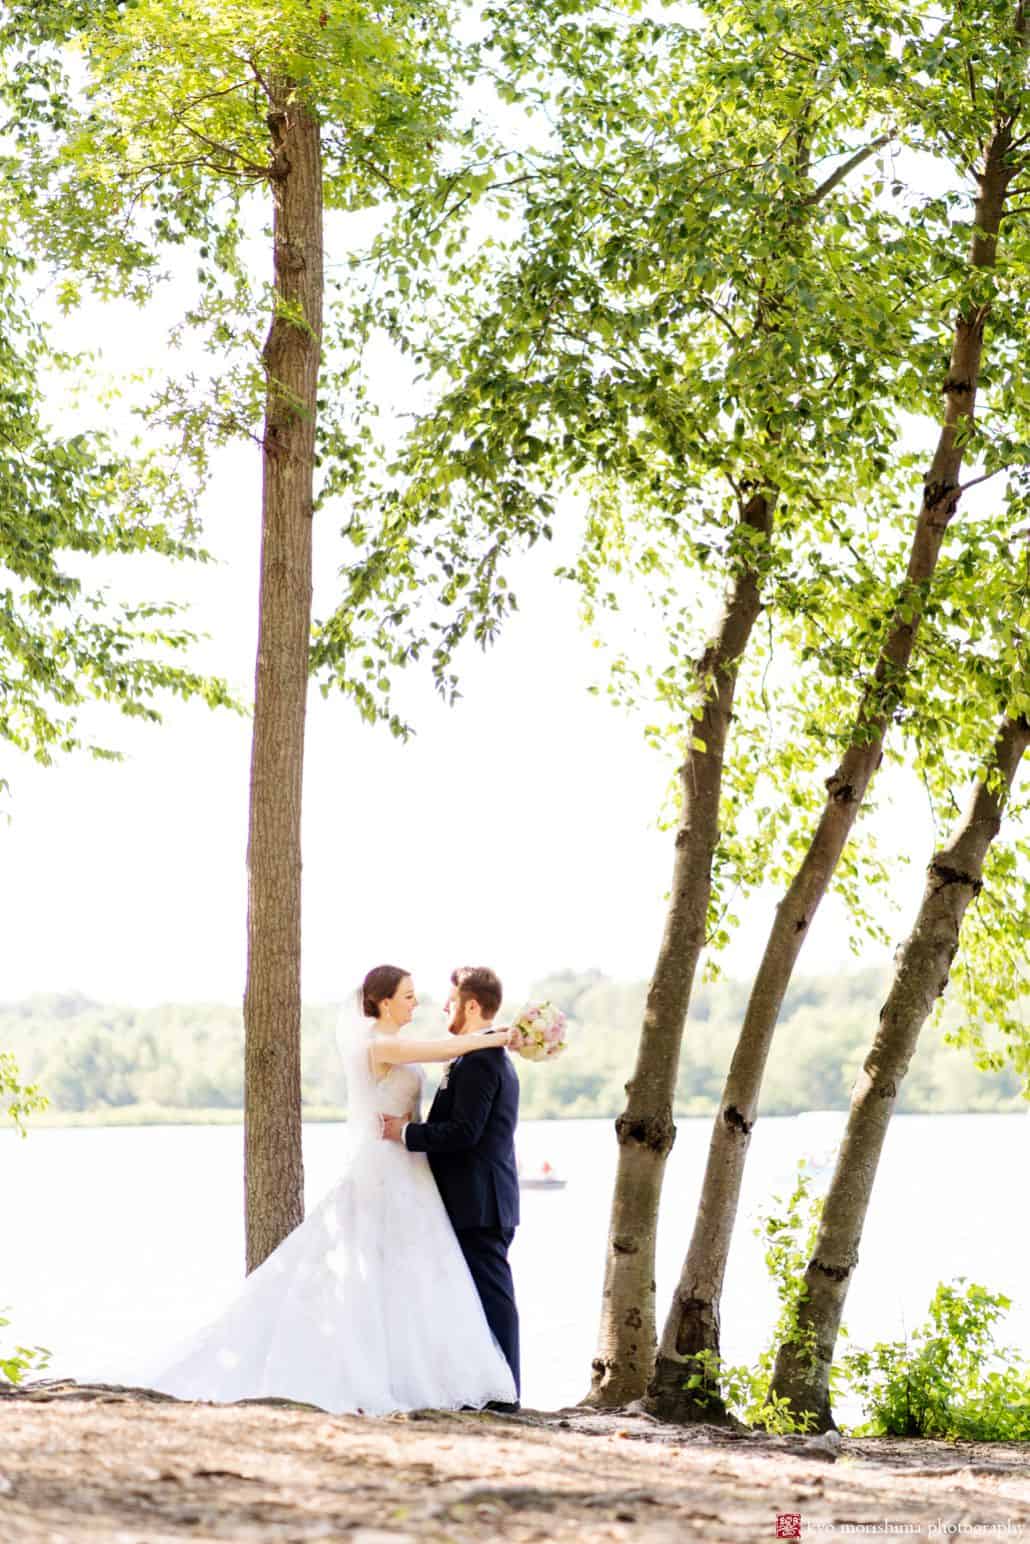 bride and groom by the water arms around each other outside wedding cute and creative wedding picture idea for outdoor wedding pictures central NJ photographer Late Spring Mercer County Boathouse Princeton NJ Wedding